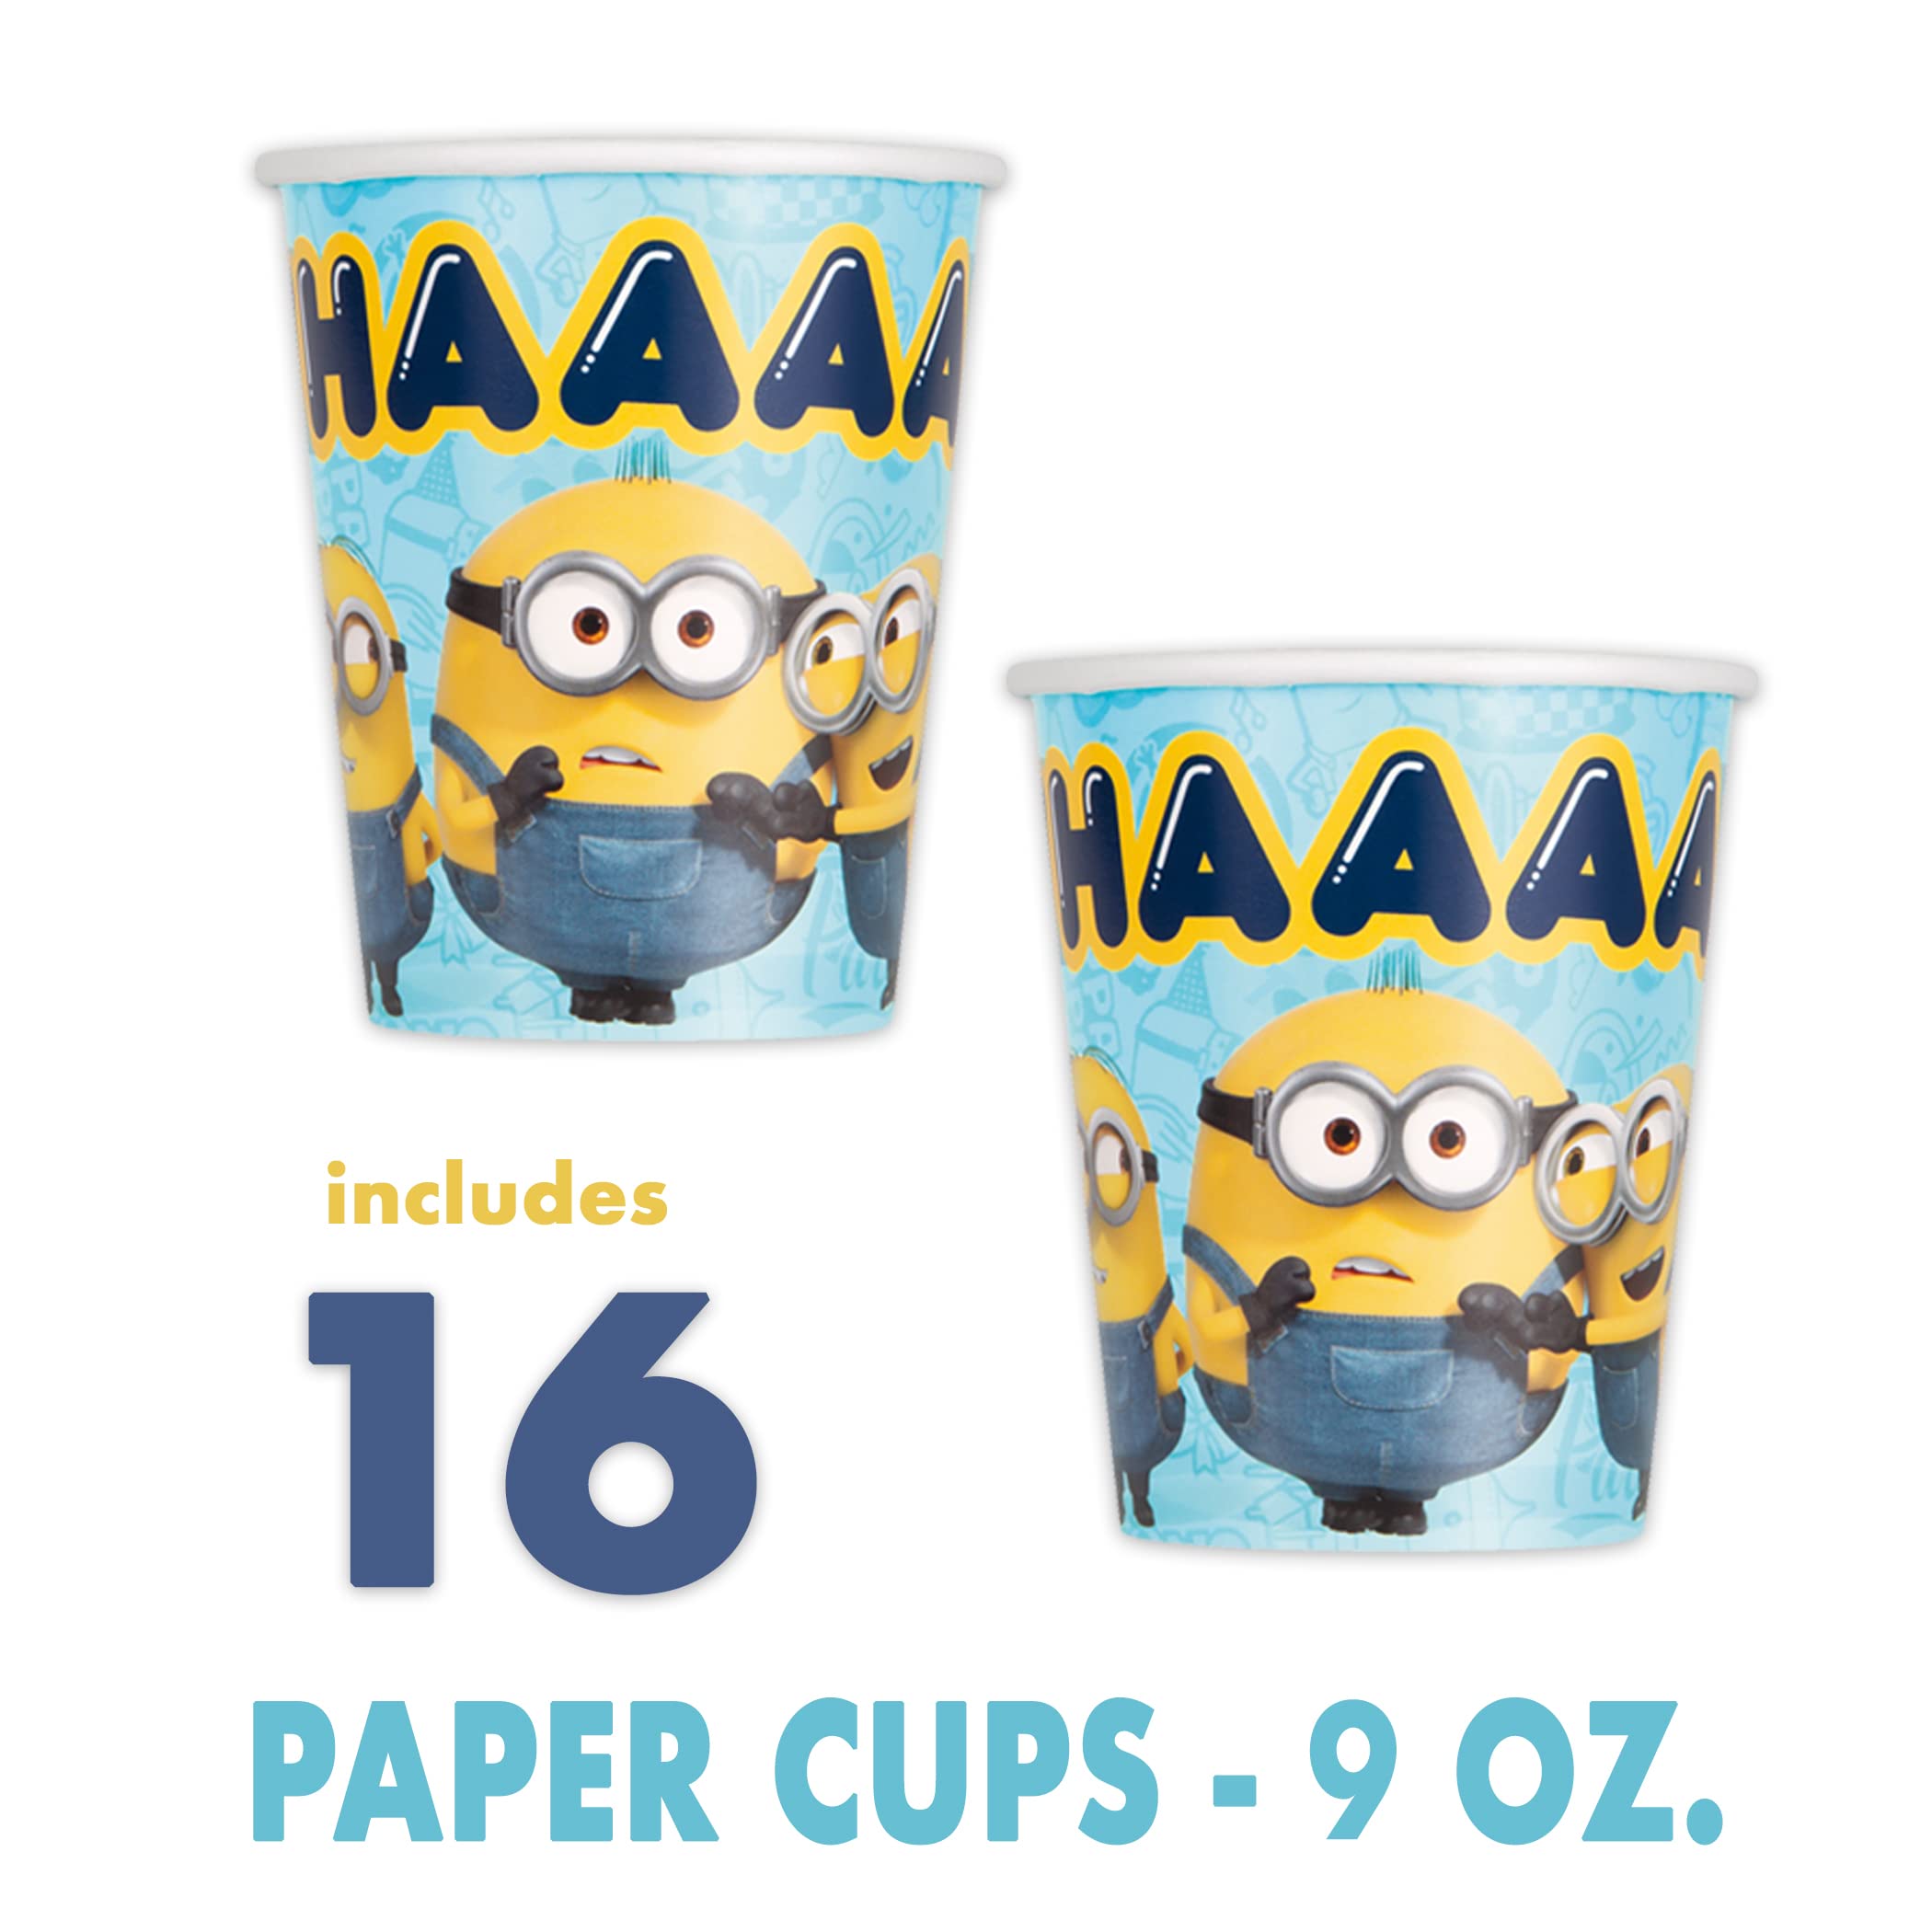 Unique Minions Birthday Party Decorations | Despicable Me Minion Birthday Party Supplies | Serves 16 Guests | With Table Cover, Banner 